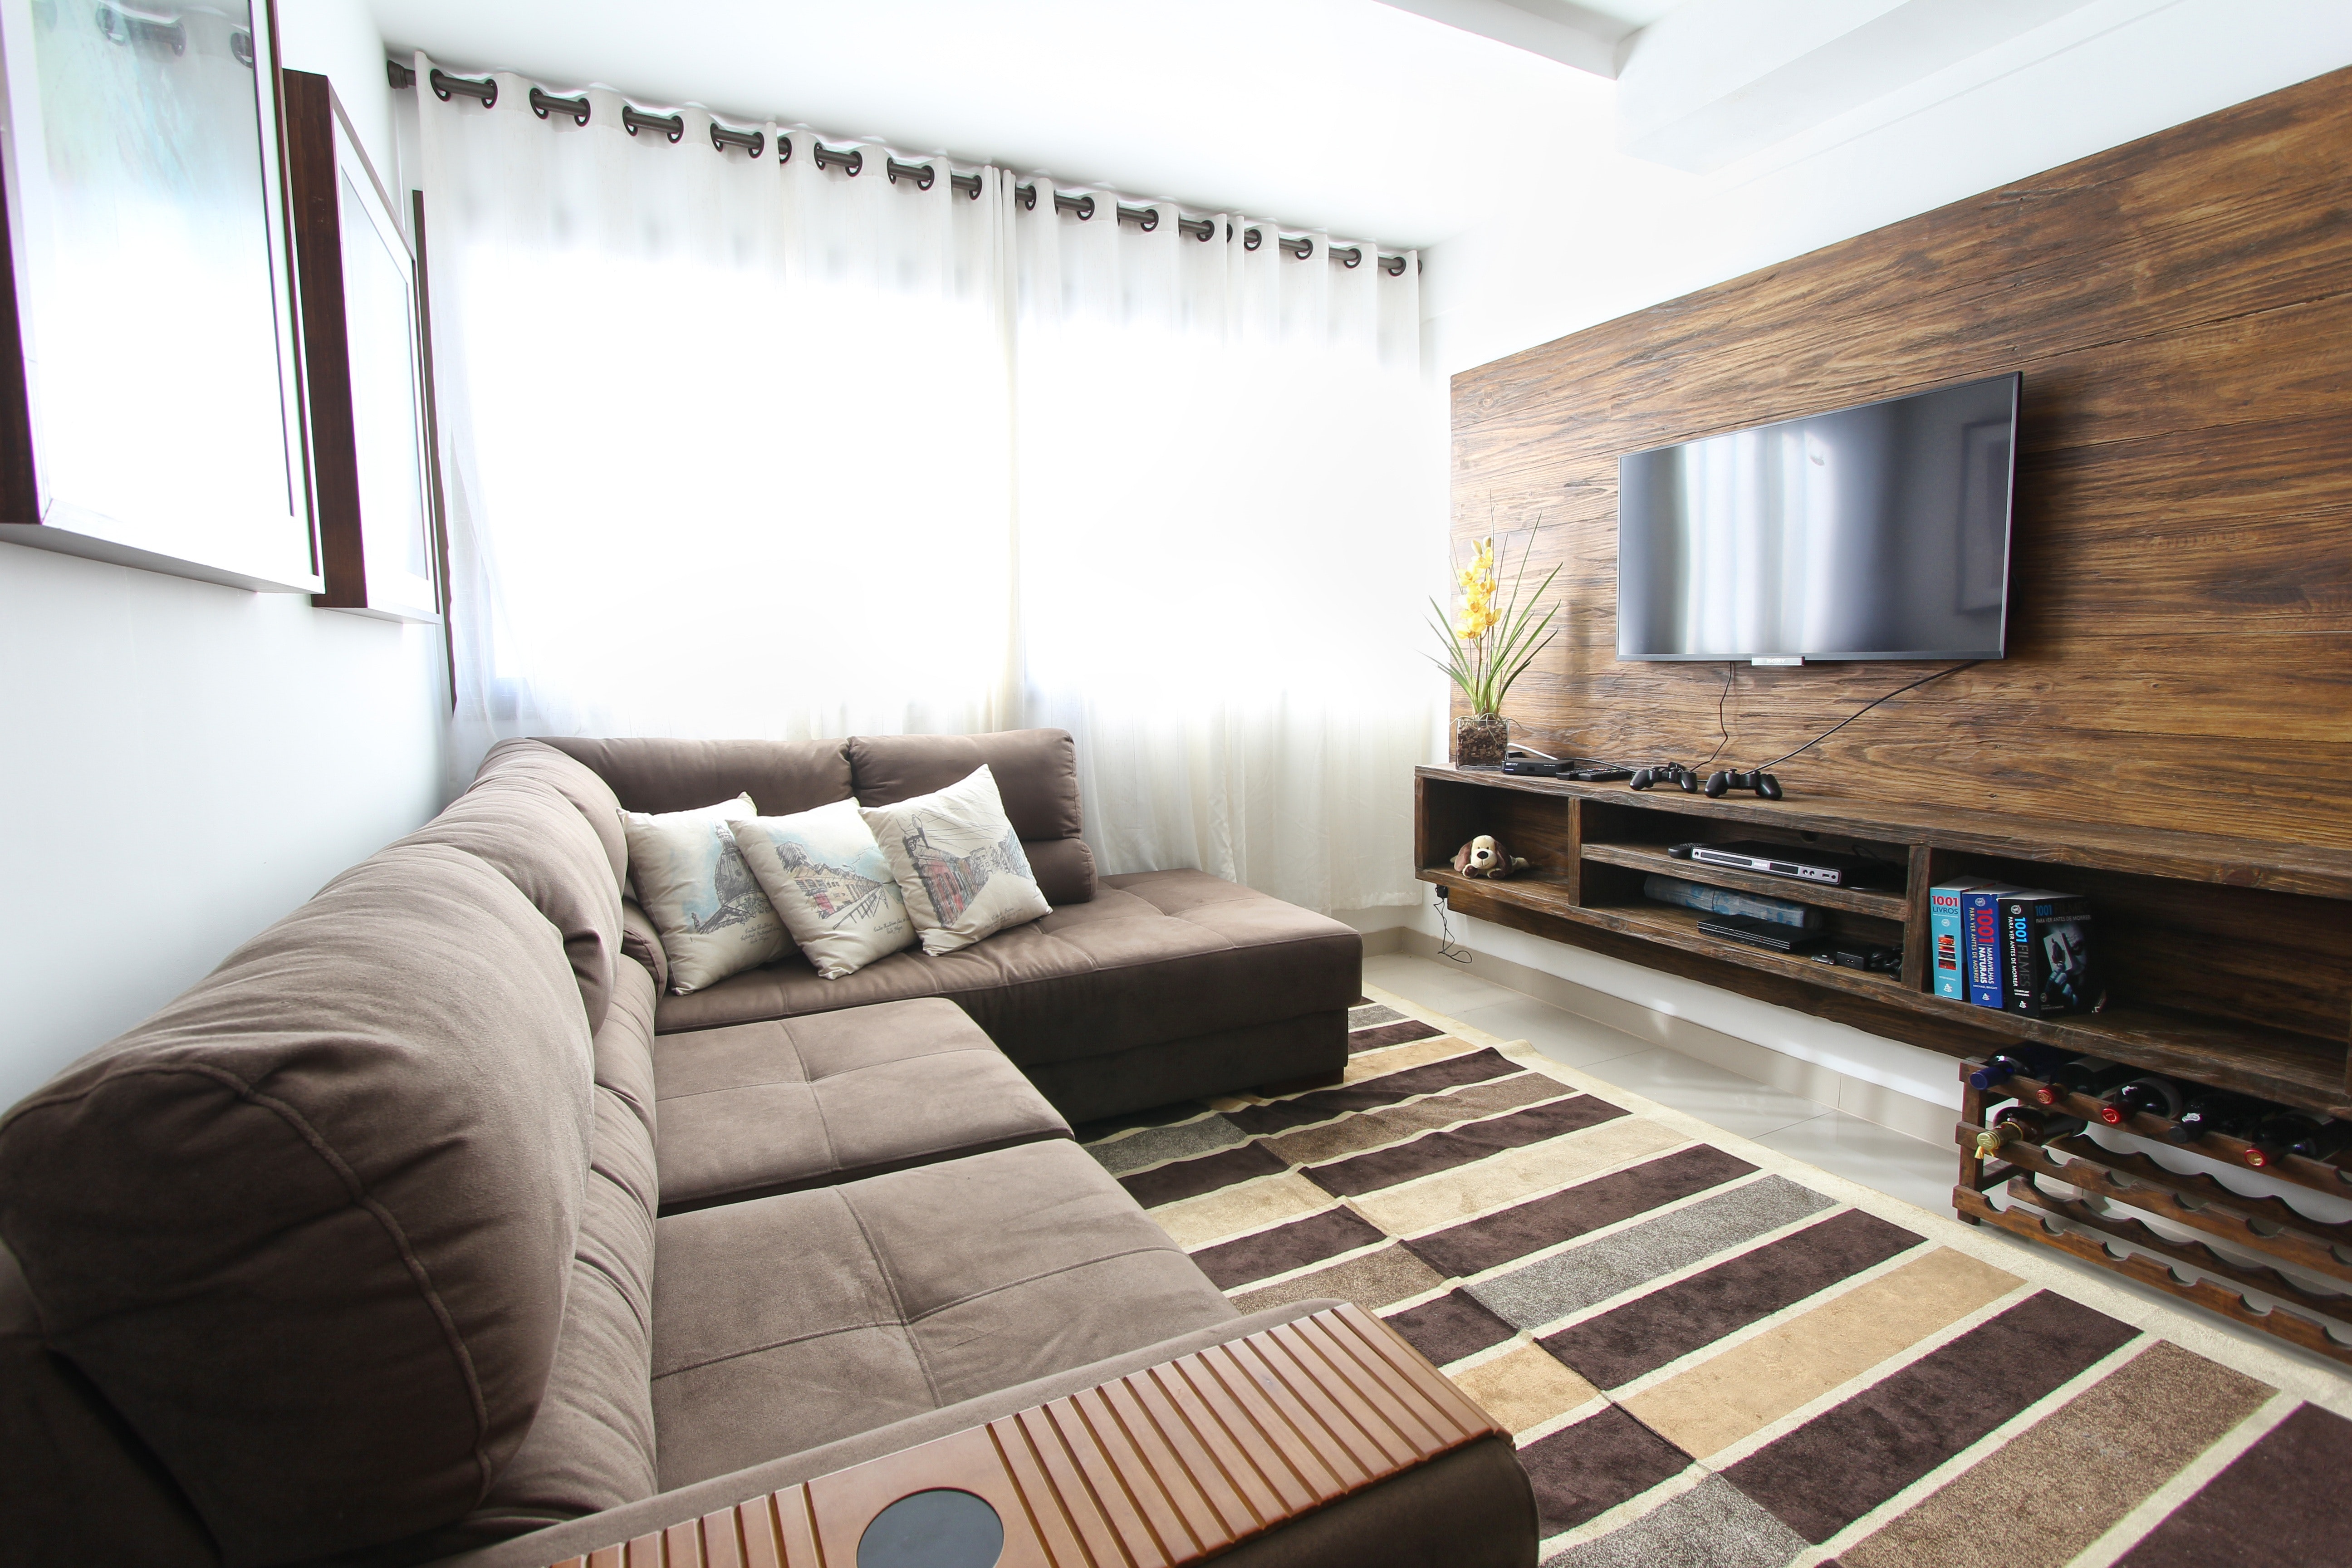 A smart TV in a brown-themed living room